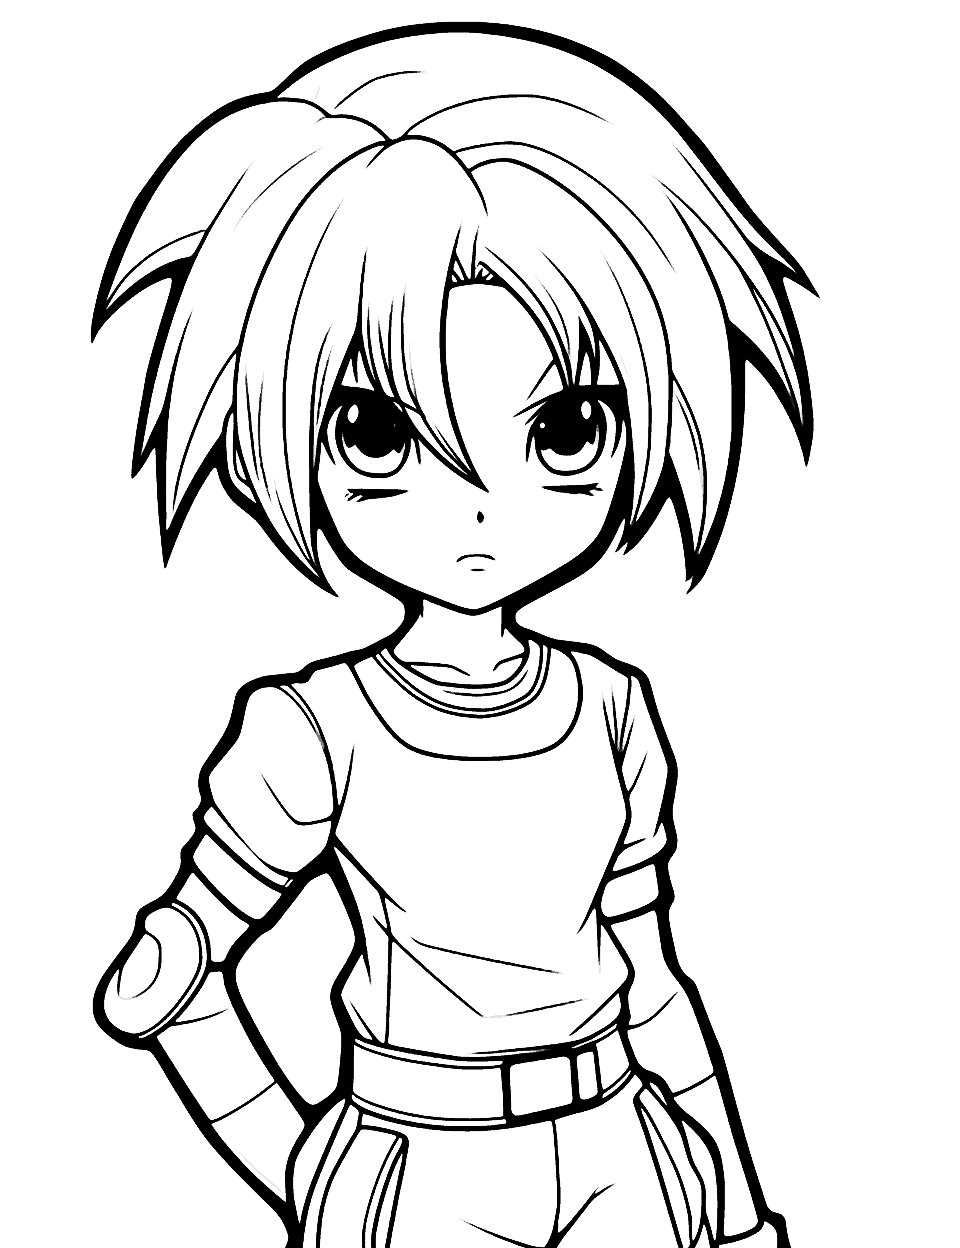 Emo Anime Girl Coloring Page - An emo anime girl with a unique hairstyle, showcasing her distinct personality.